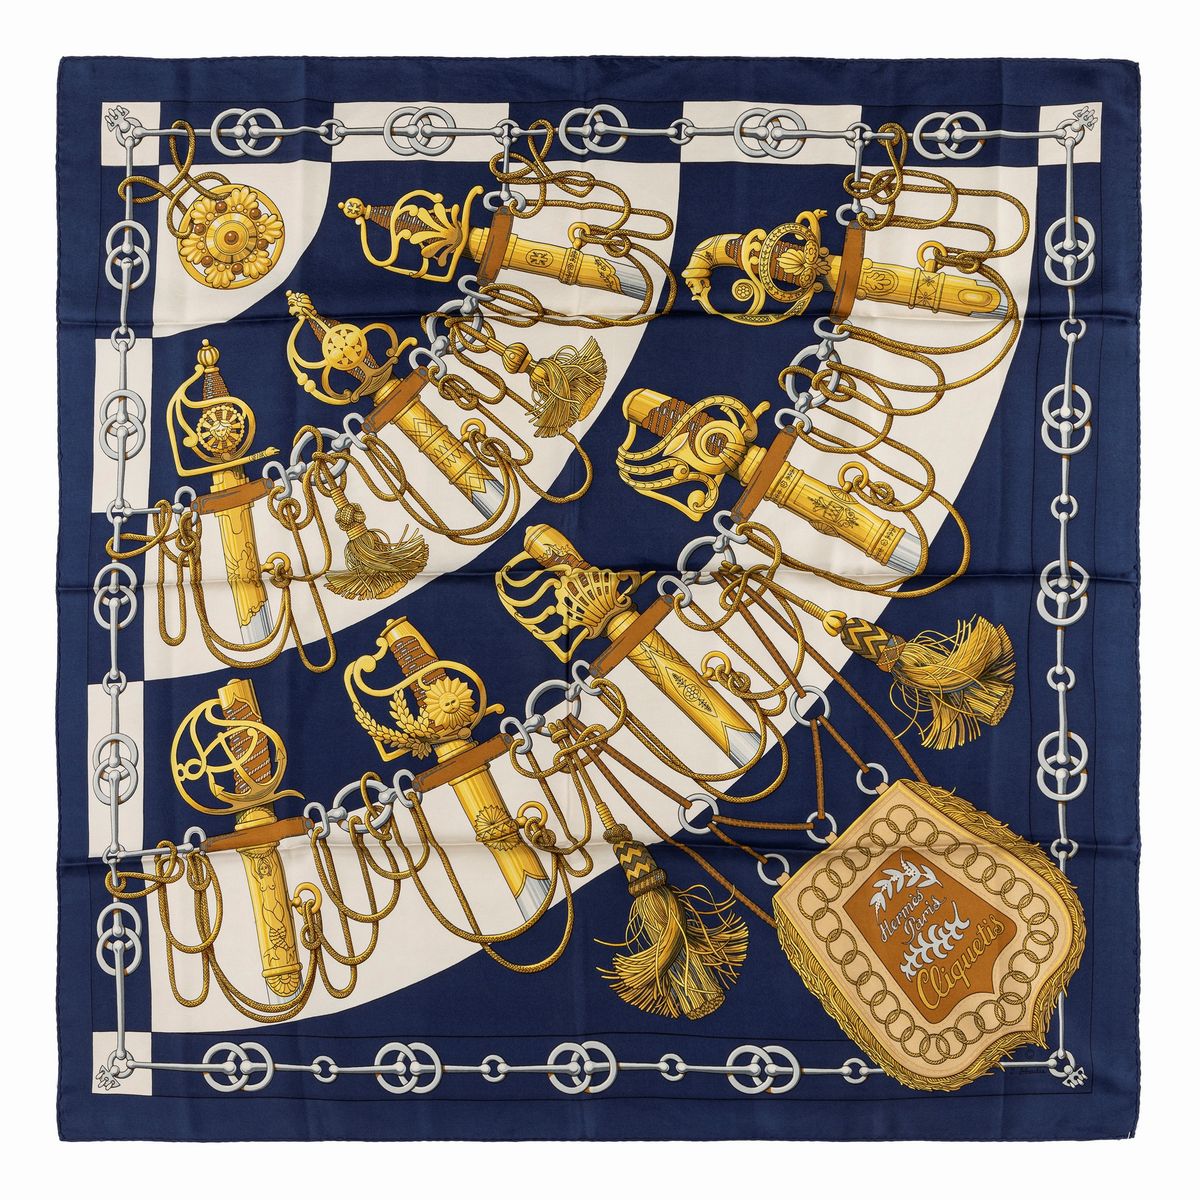 Sold at Auction: Hermes 'Vif Argent' silk scarf, designed in 2007